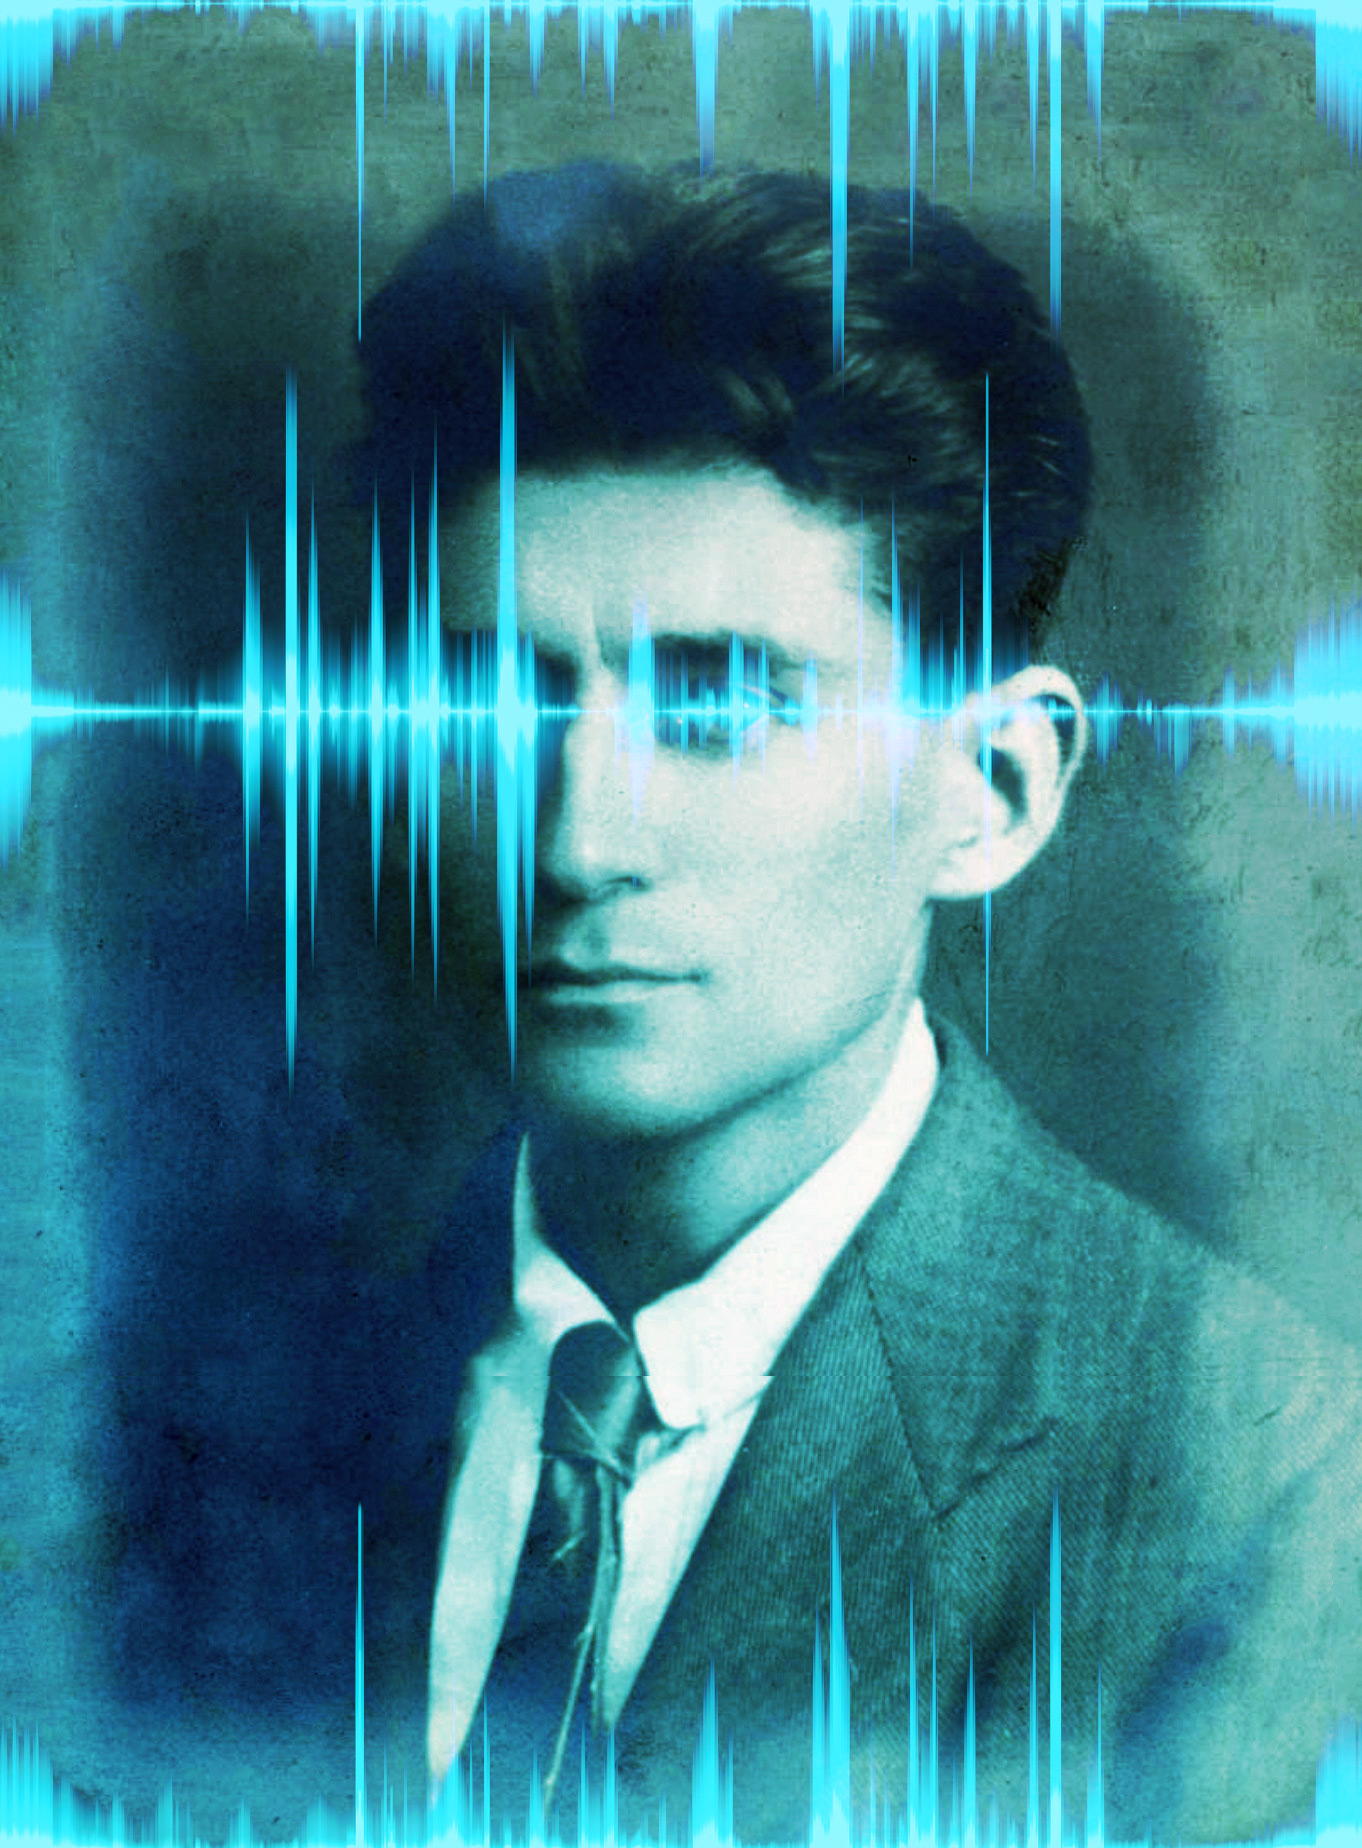 Kafka intersected with sound waves.